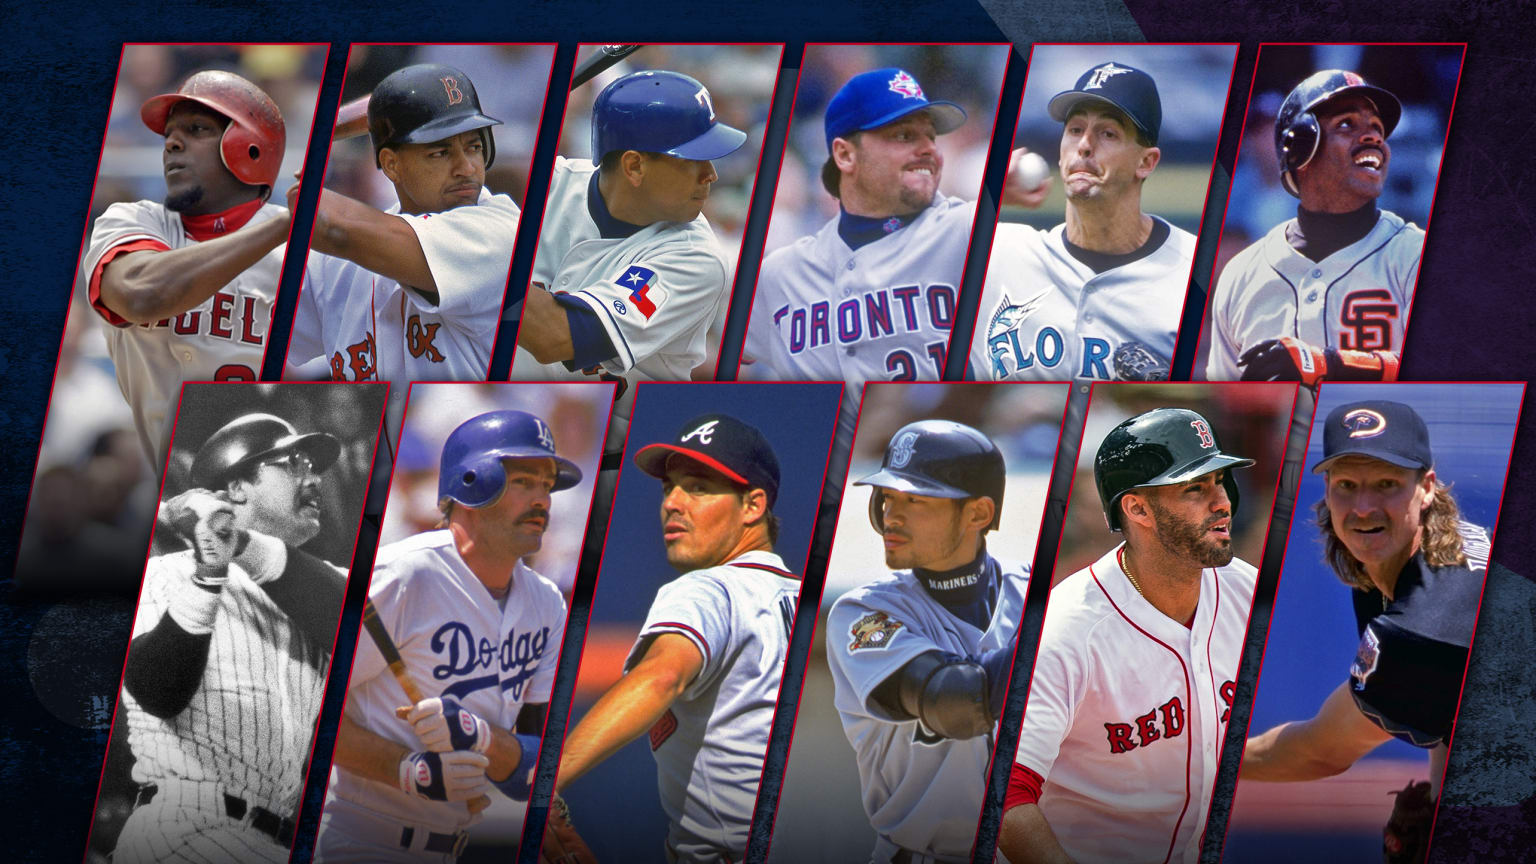 Pictures of various current and past MLB players in rows